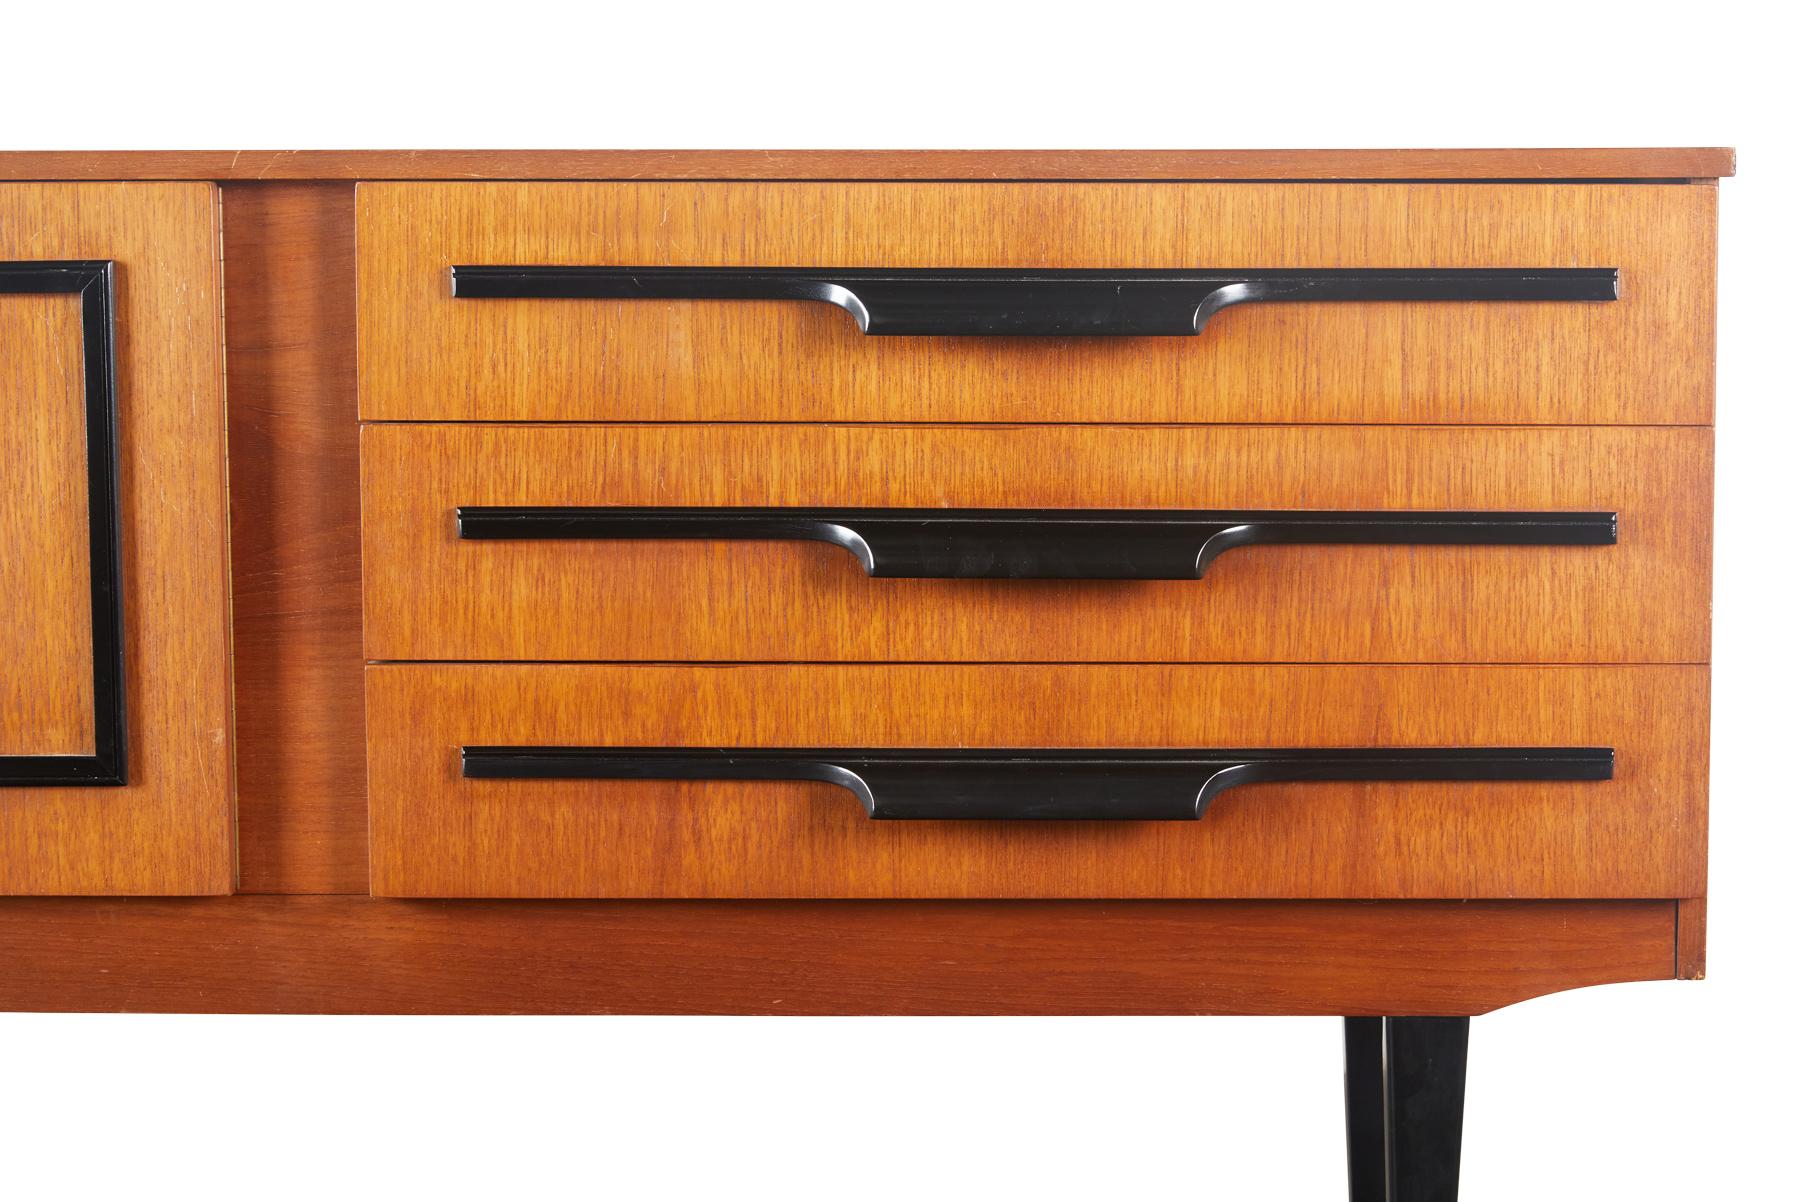 English Modern Midcentury Credenza in Teak with Black Lacquer Accents 2